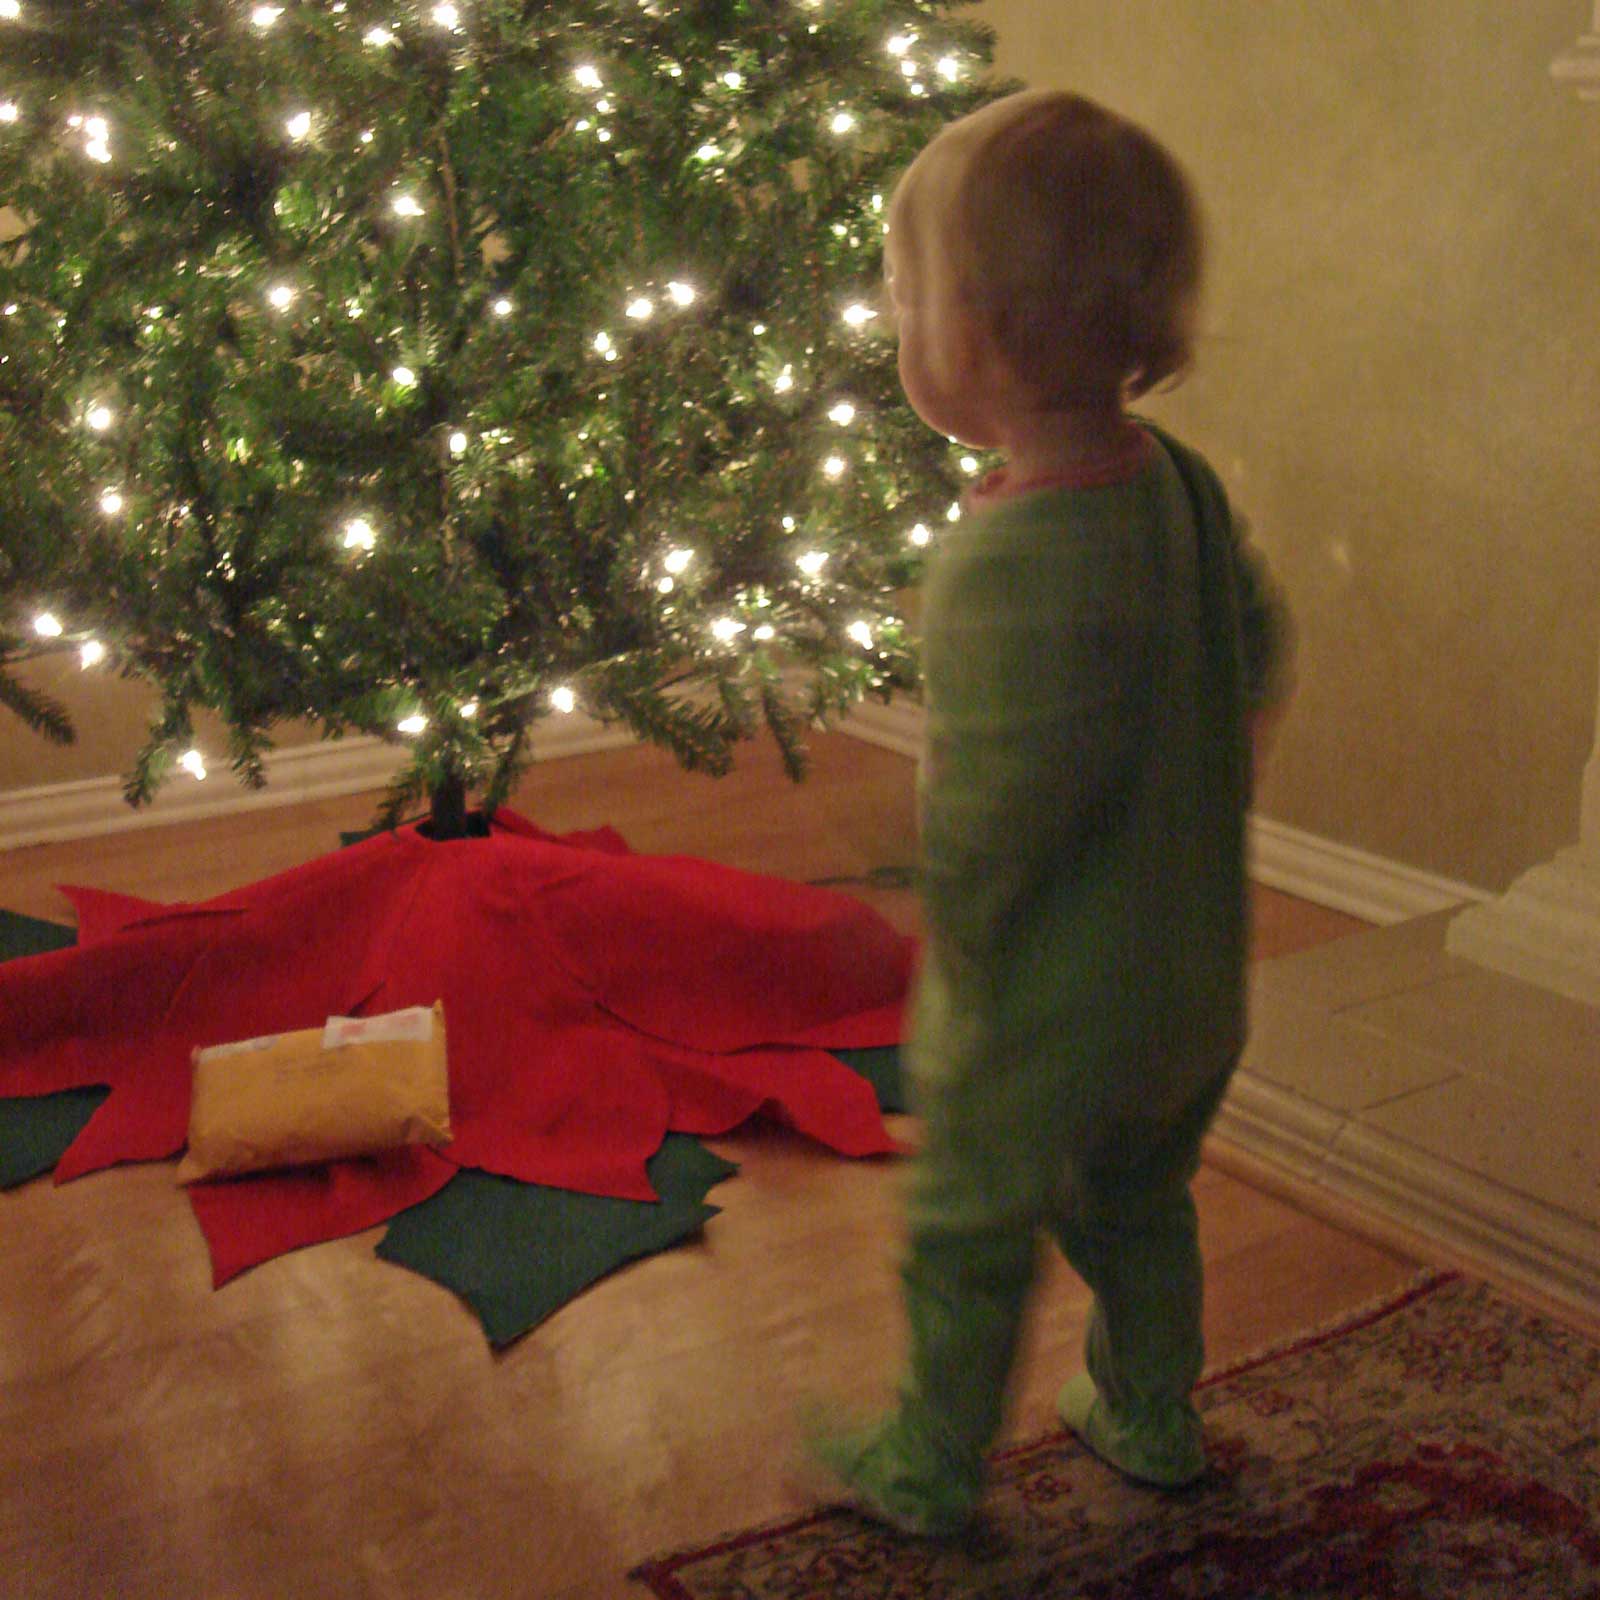 Emily wearing footy pajamas looking at our Christmas tree